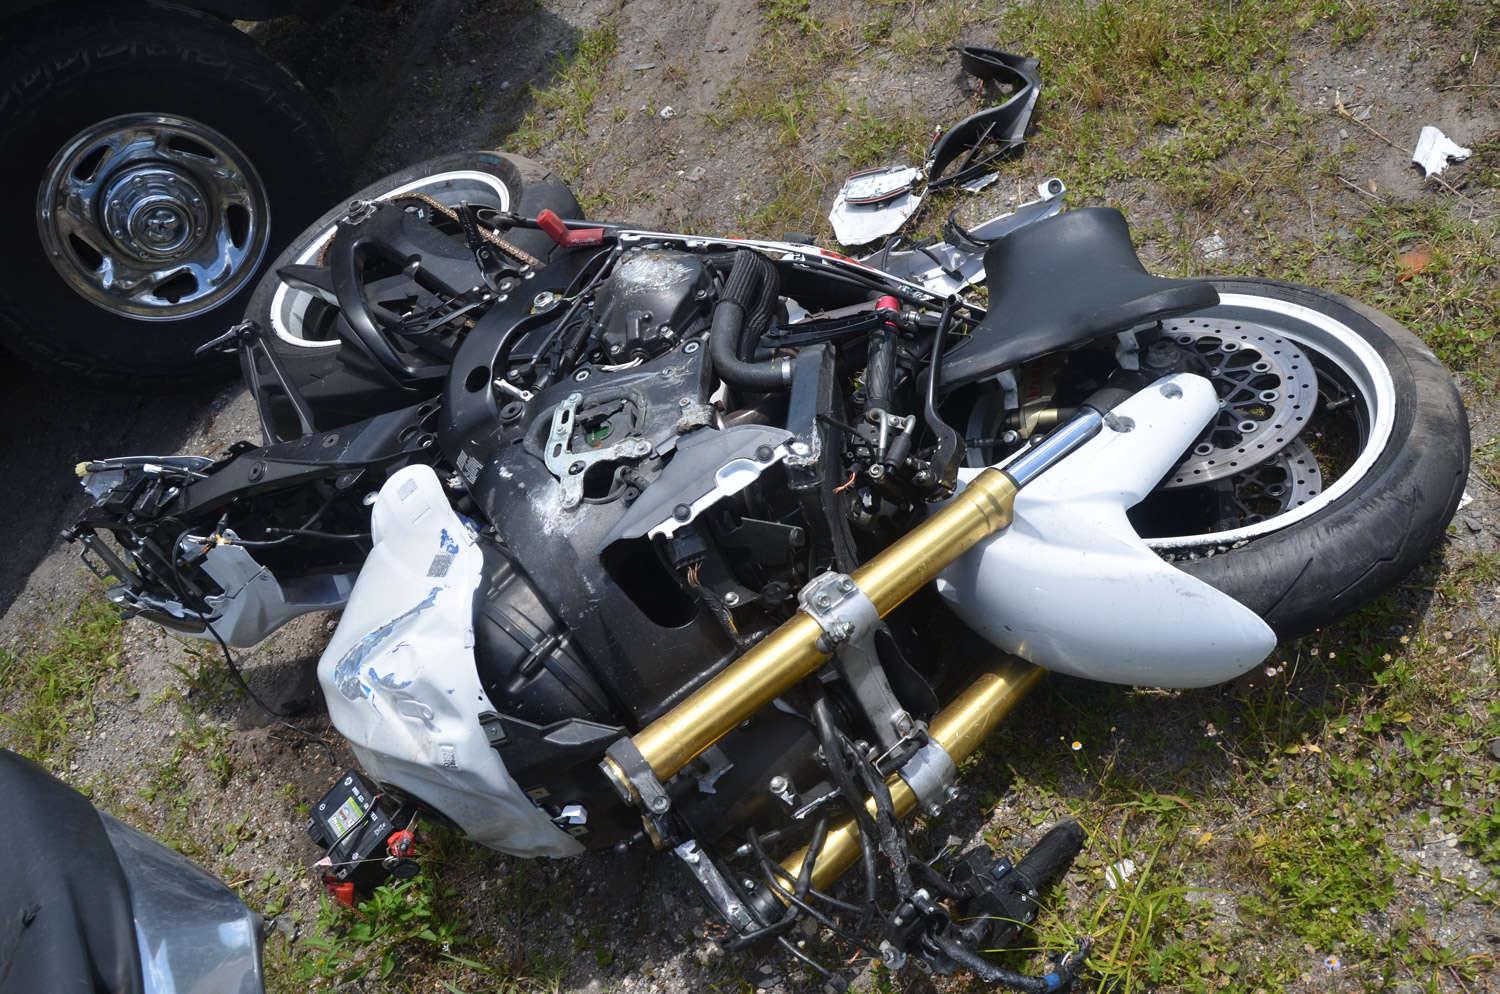 The 2015 Suzuki motorcycle after this morning's crash. Click on the image for larger view. (© FlaglerLive)